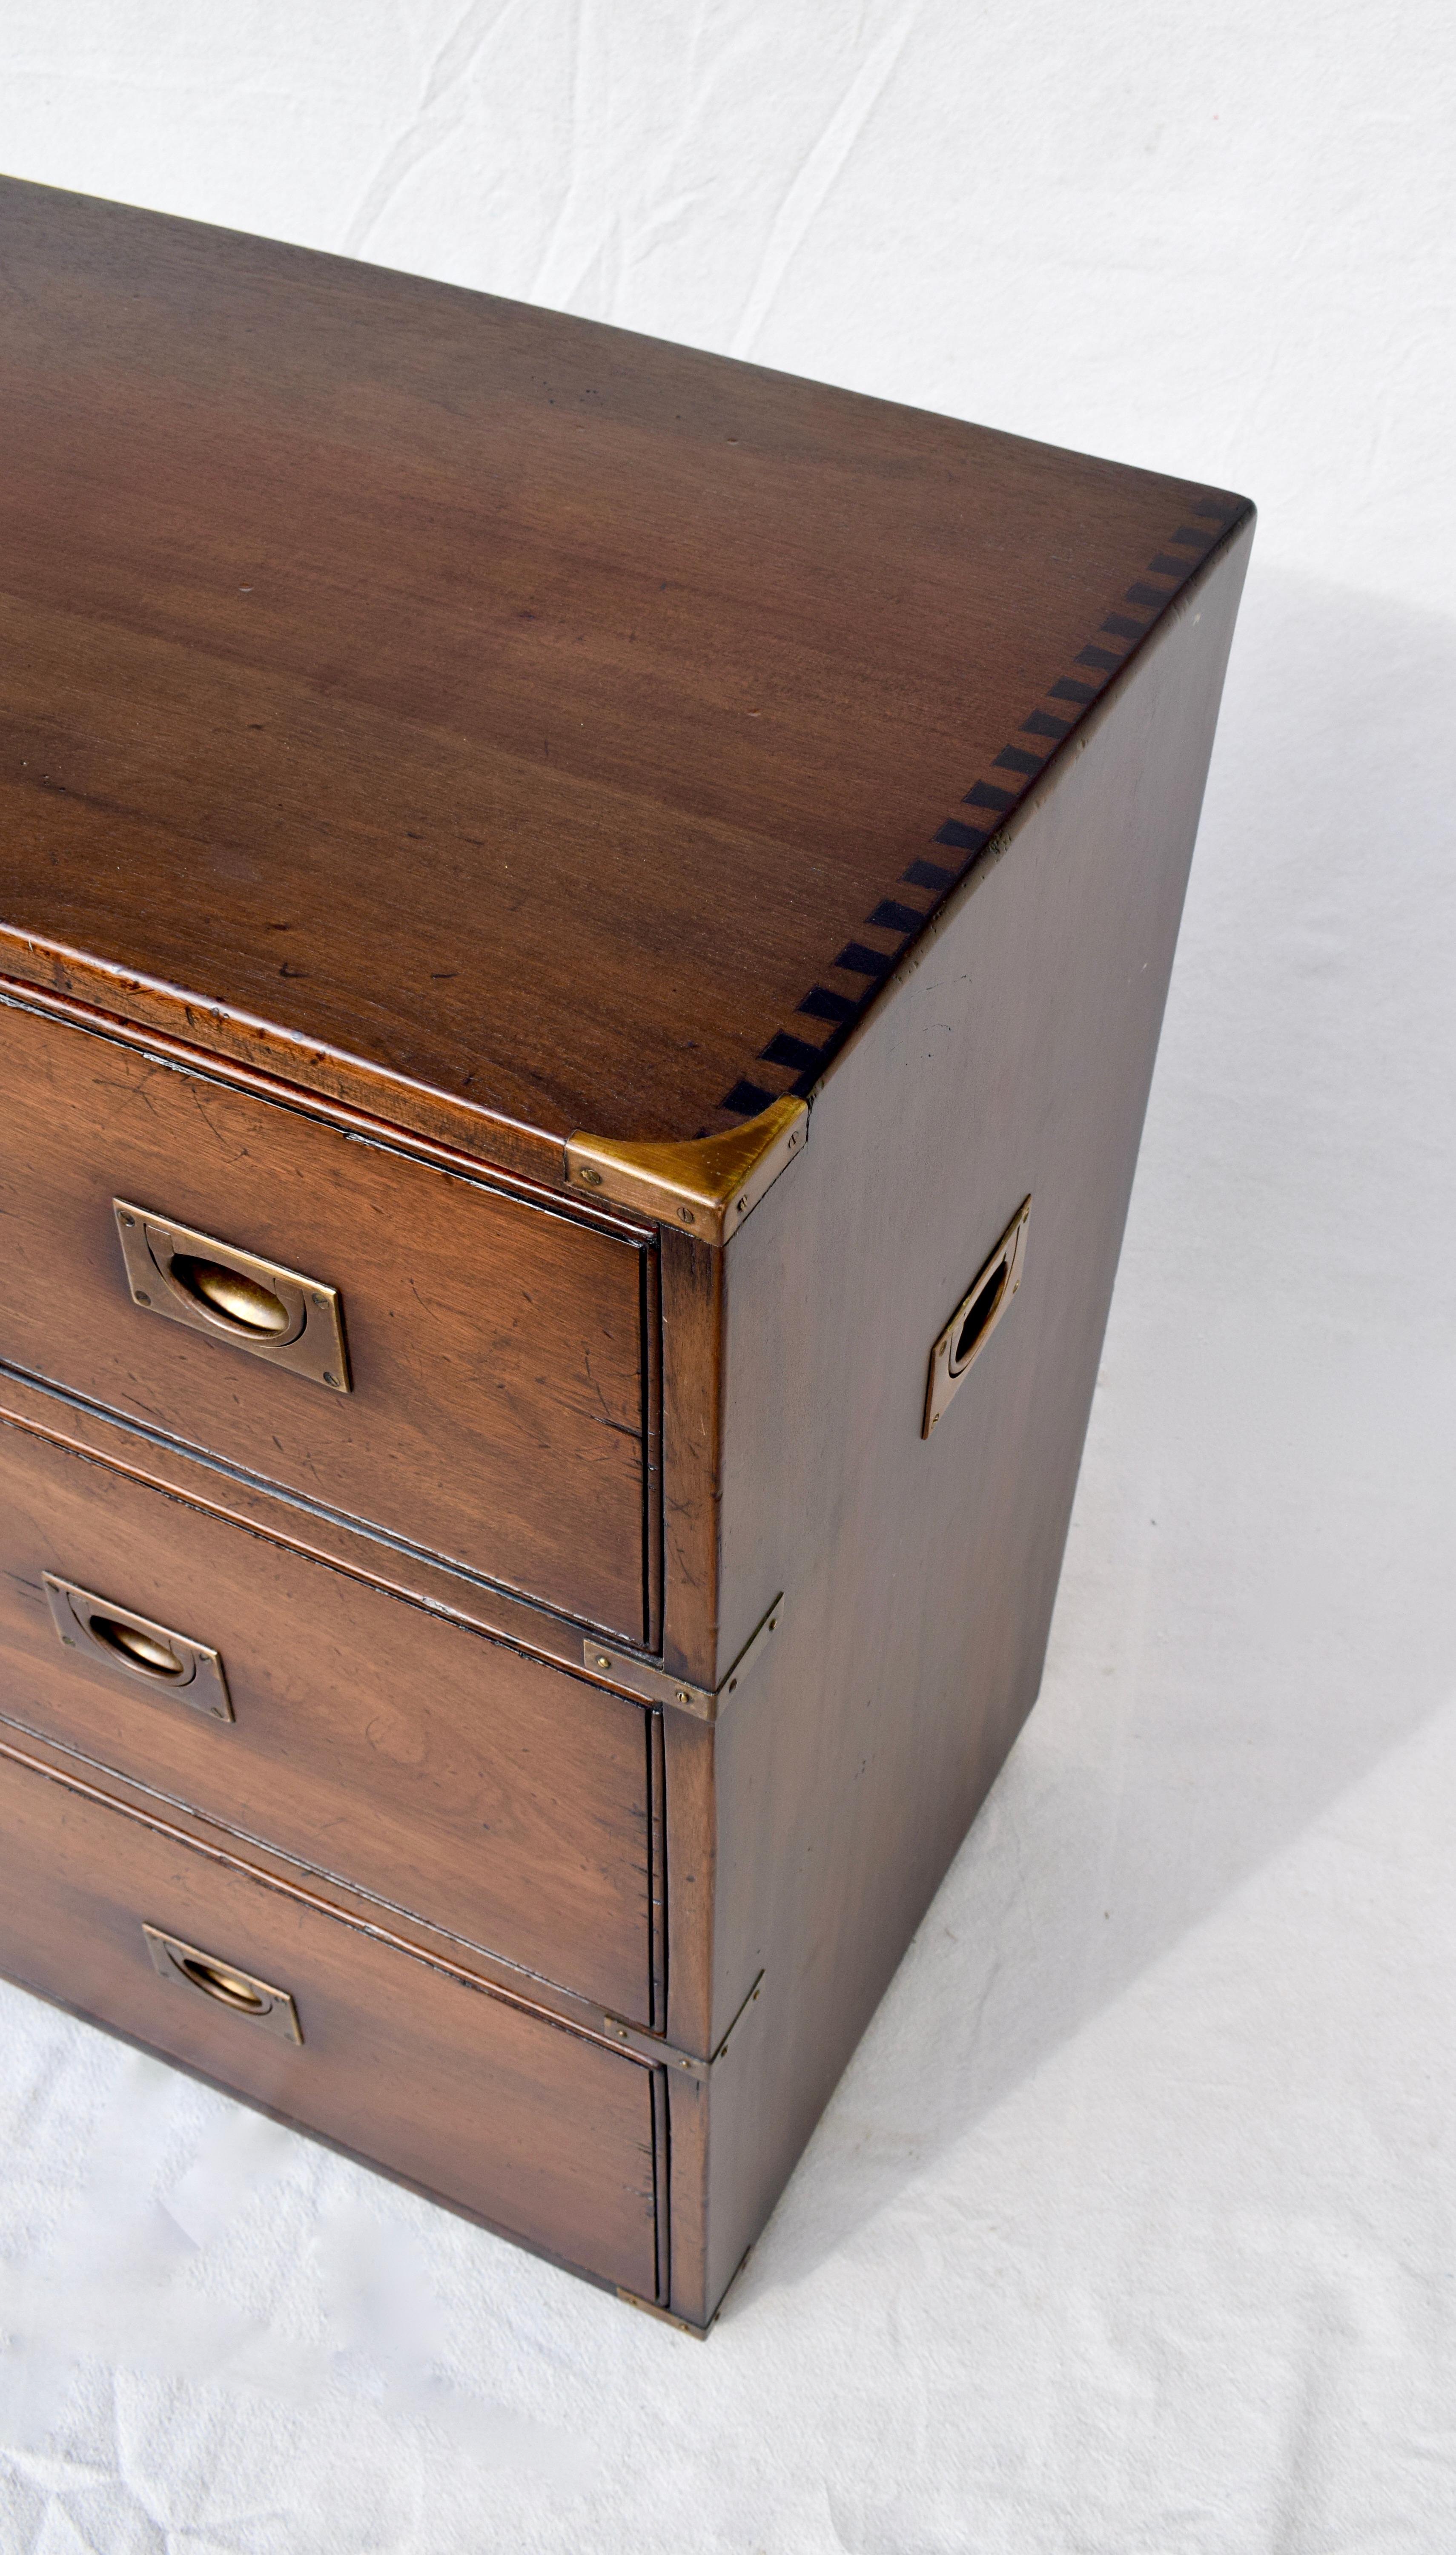 19th C. Solid Mahogany Officers Campaign chest of seven drawers with hand dovetail detailing & construction to the top, sides & drawers. A substantial heirloom of generous size with exceptionally spacious drawers